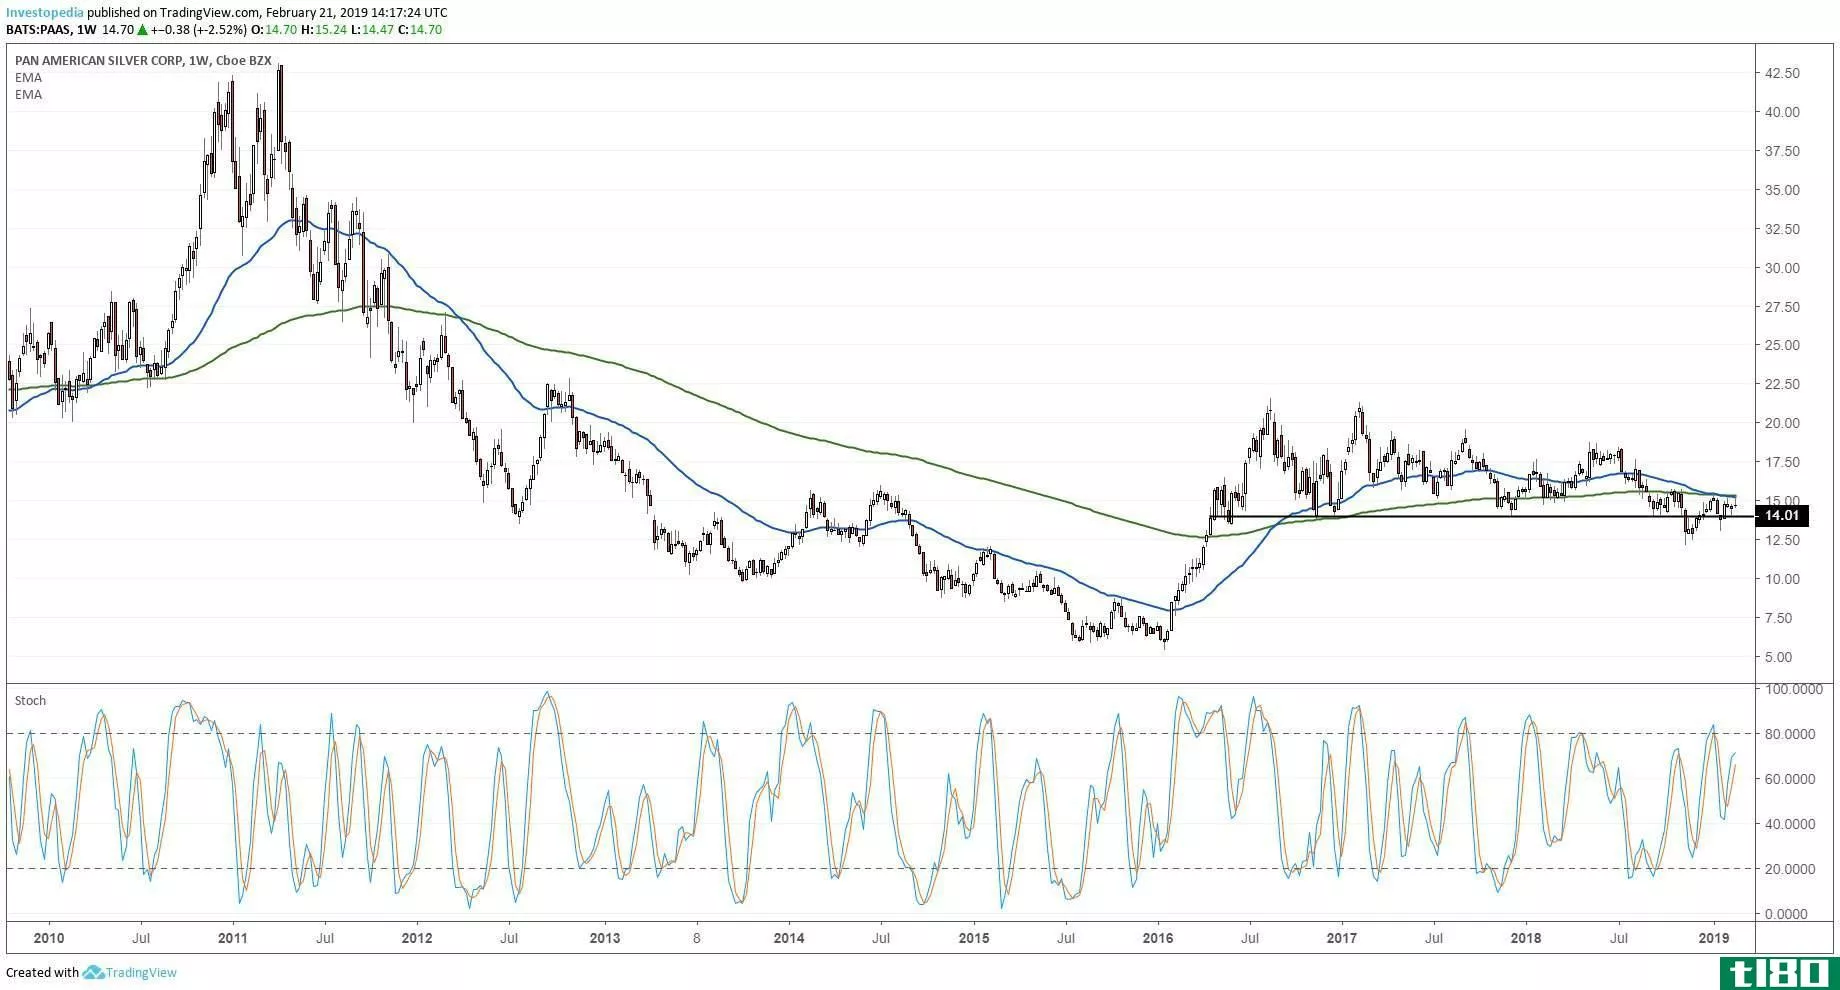 Technical chart showing the performance of Pan American Silver Corp (PAAS)